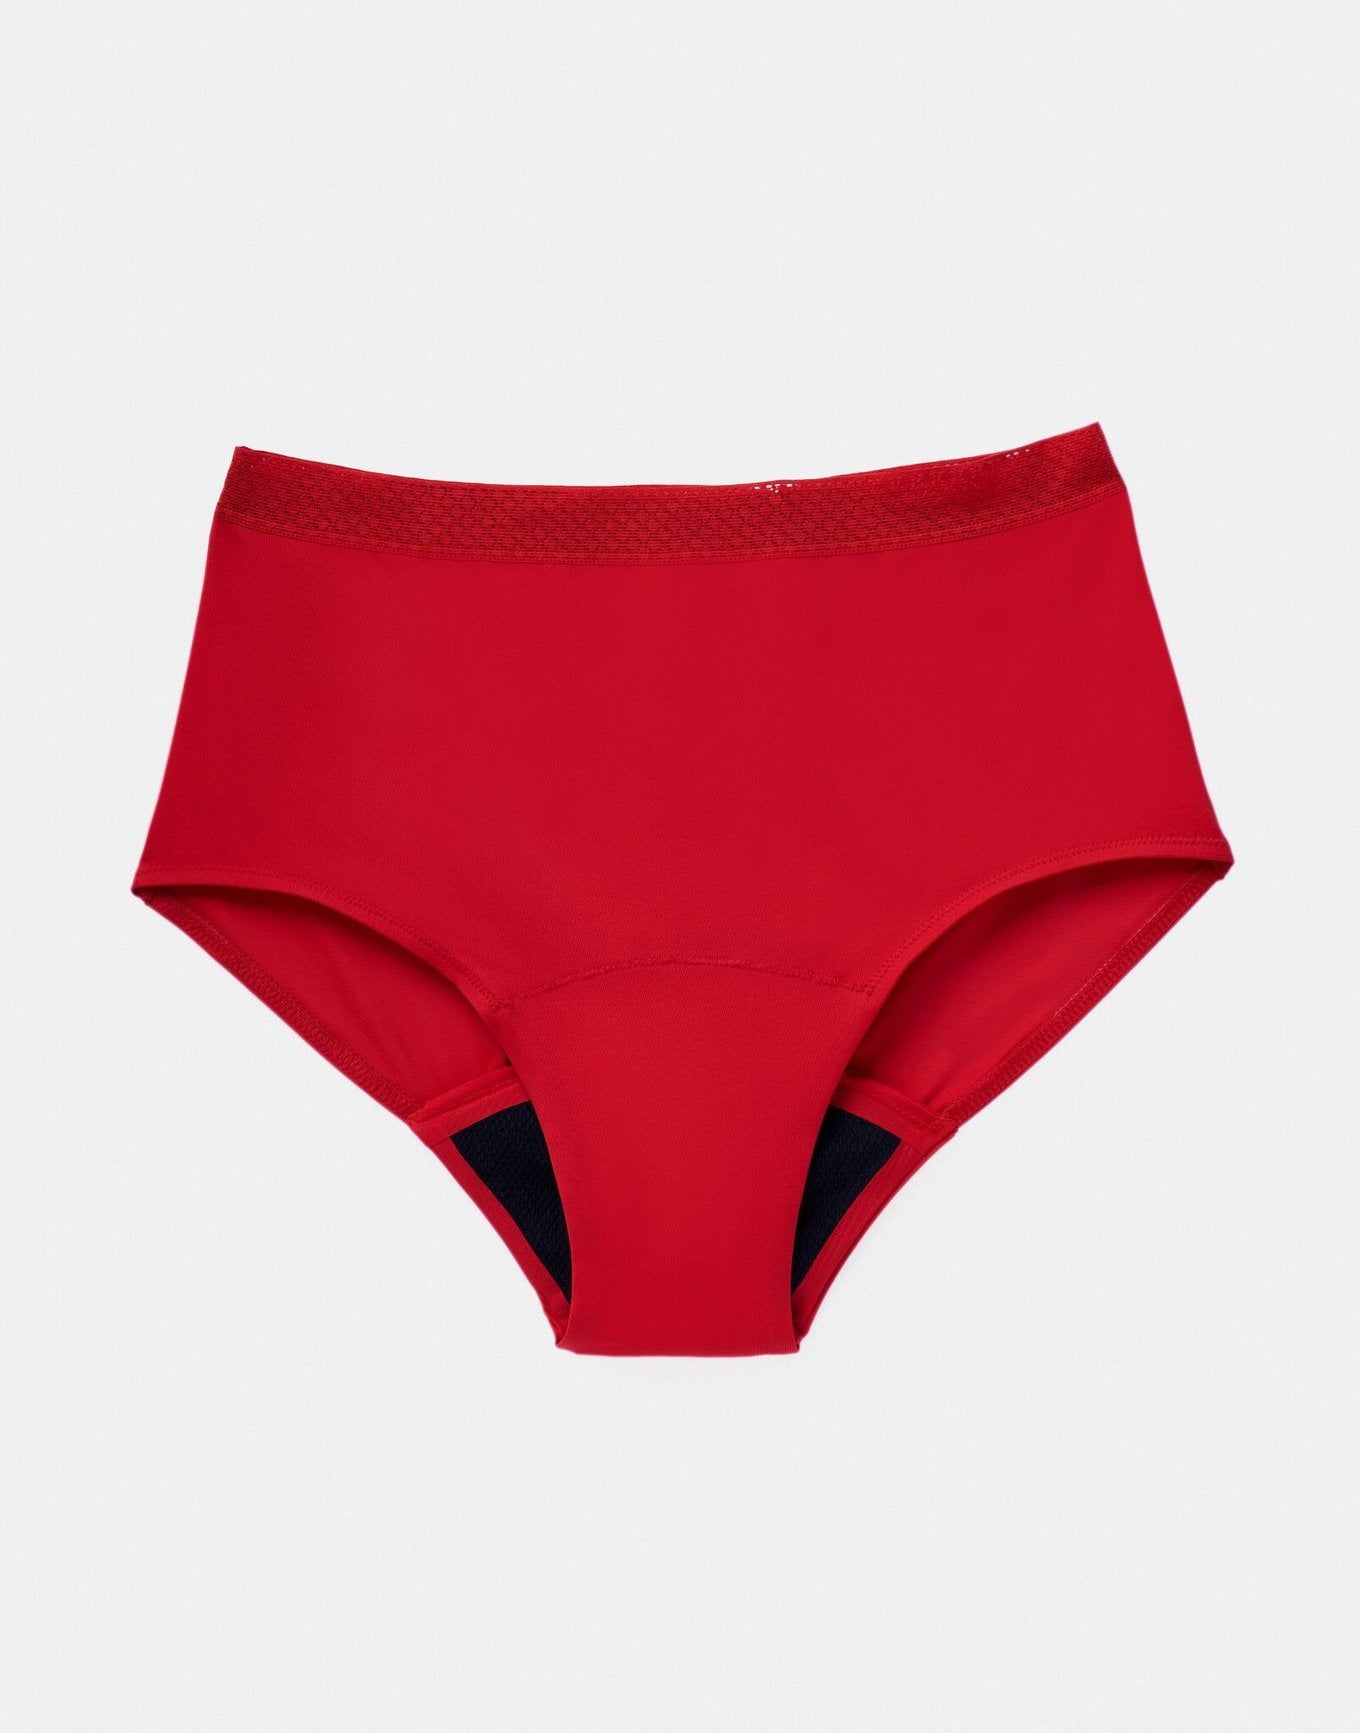 Joyja Jess period-proof panty in color Barbados Cherry and shape high waisted